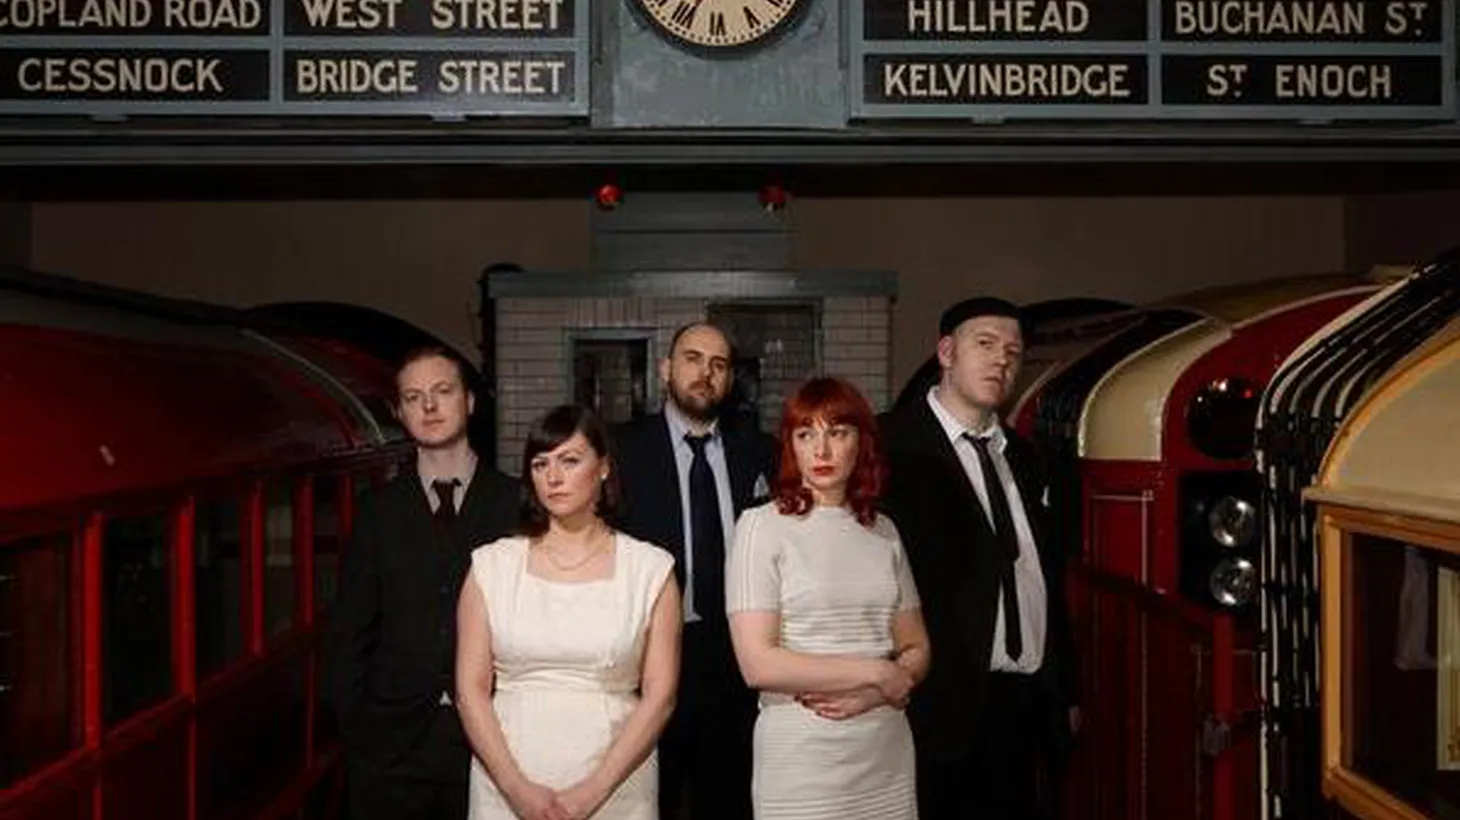 Scotland-based Camera Obscura perform songs from their uplifting release My Maudlin Career on Morning Becomes Eclectic at 11:15am.